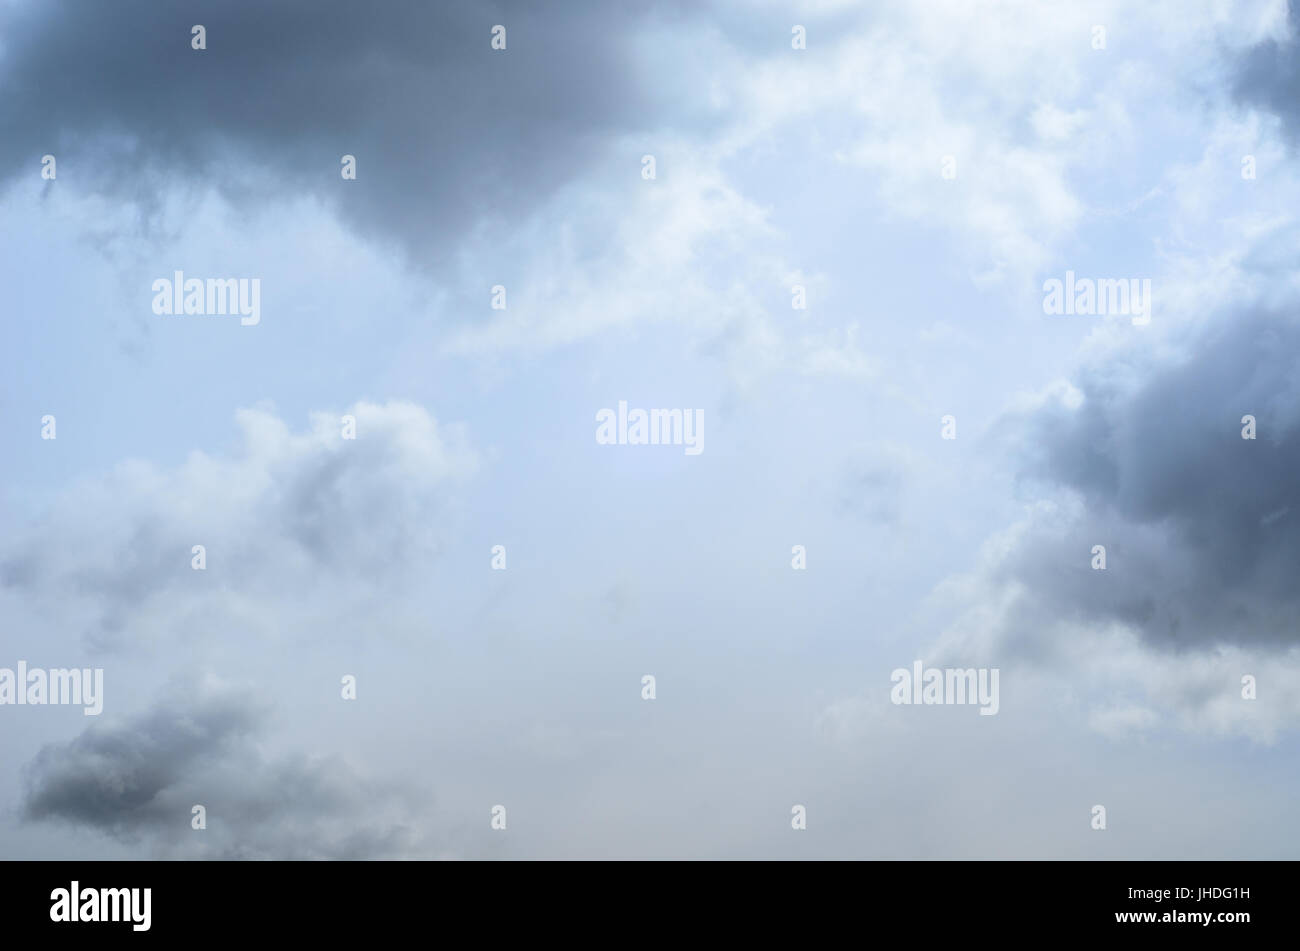 Mystical pale blue sky background with light, white and grey fluffy clouds. Stock Photo